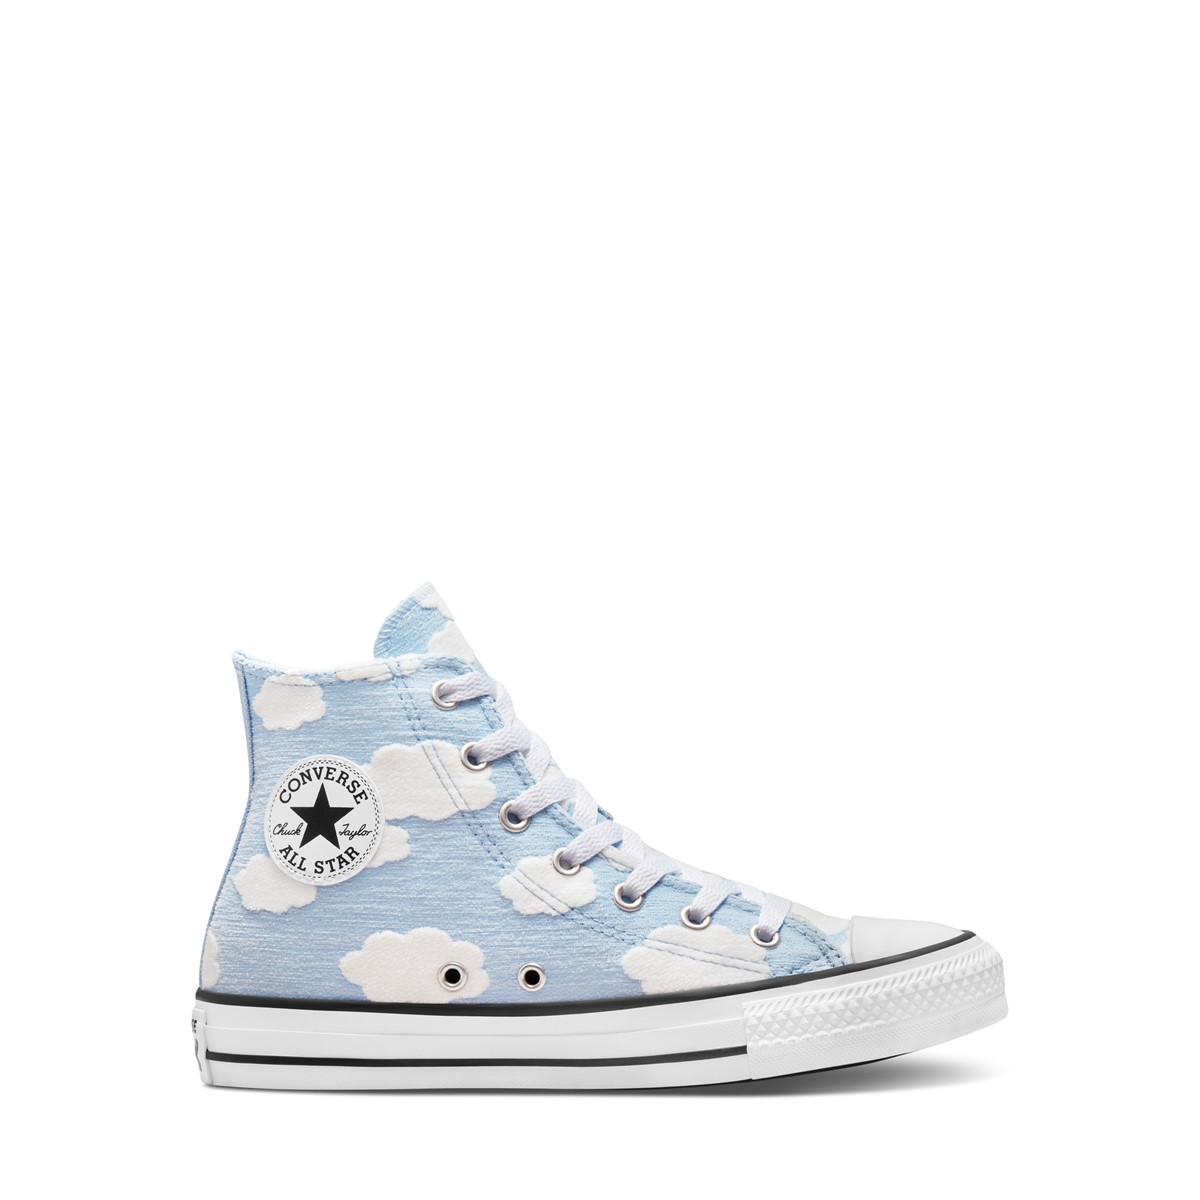 Little Kids' Chuck Taylor All Star Cloud Hi Sneakers in Blue/White